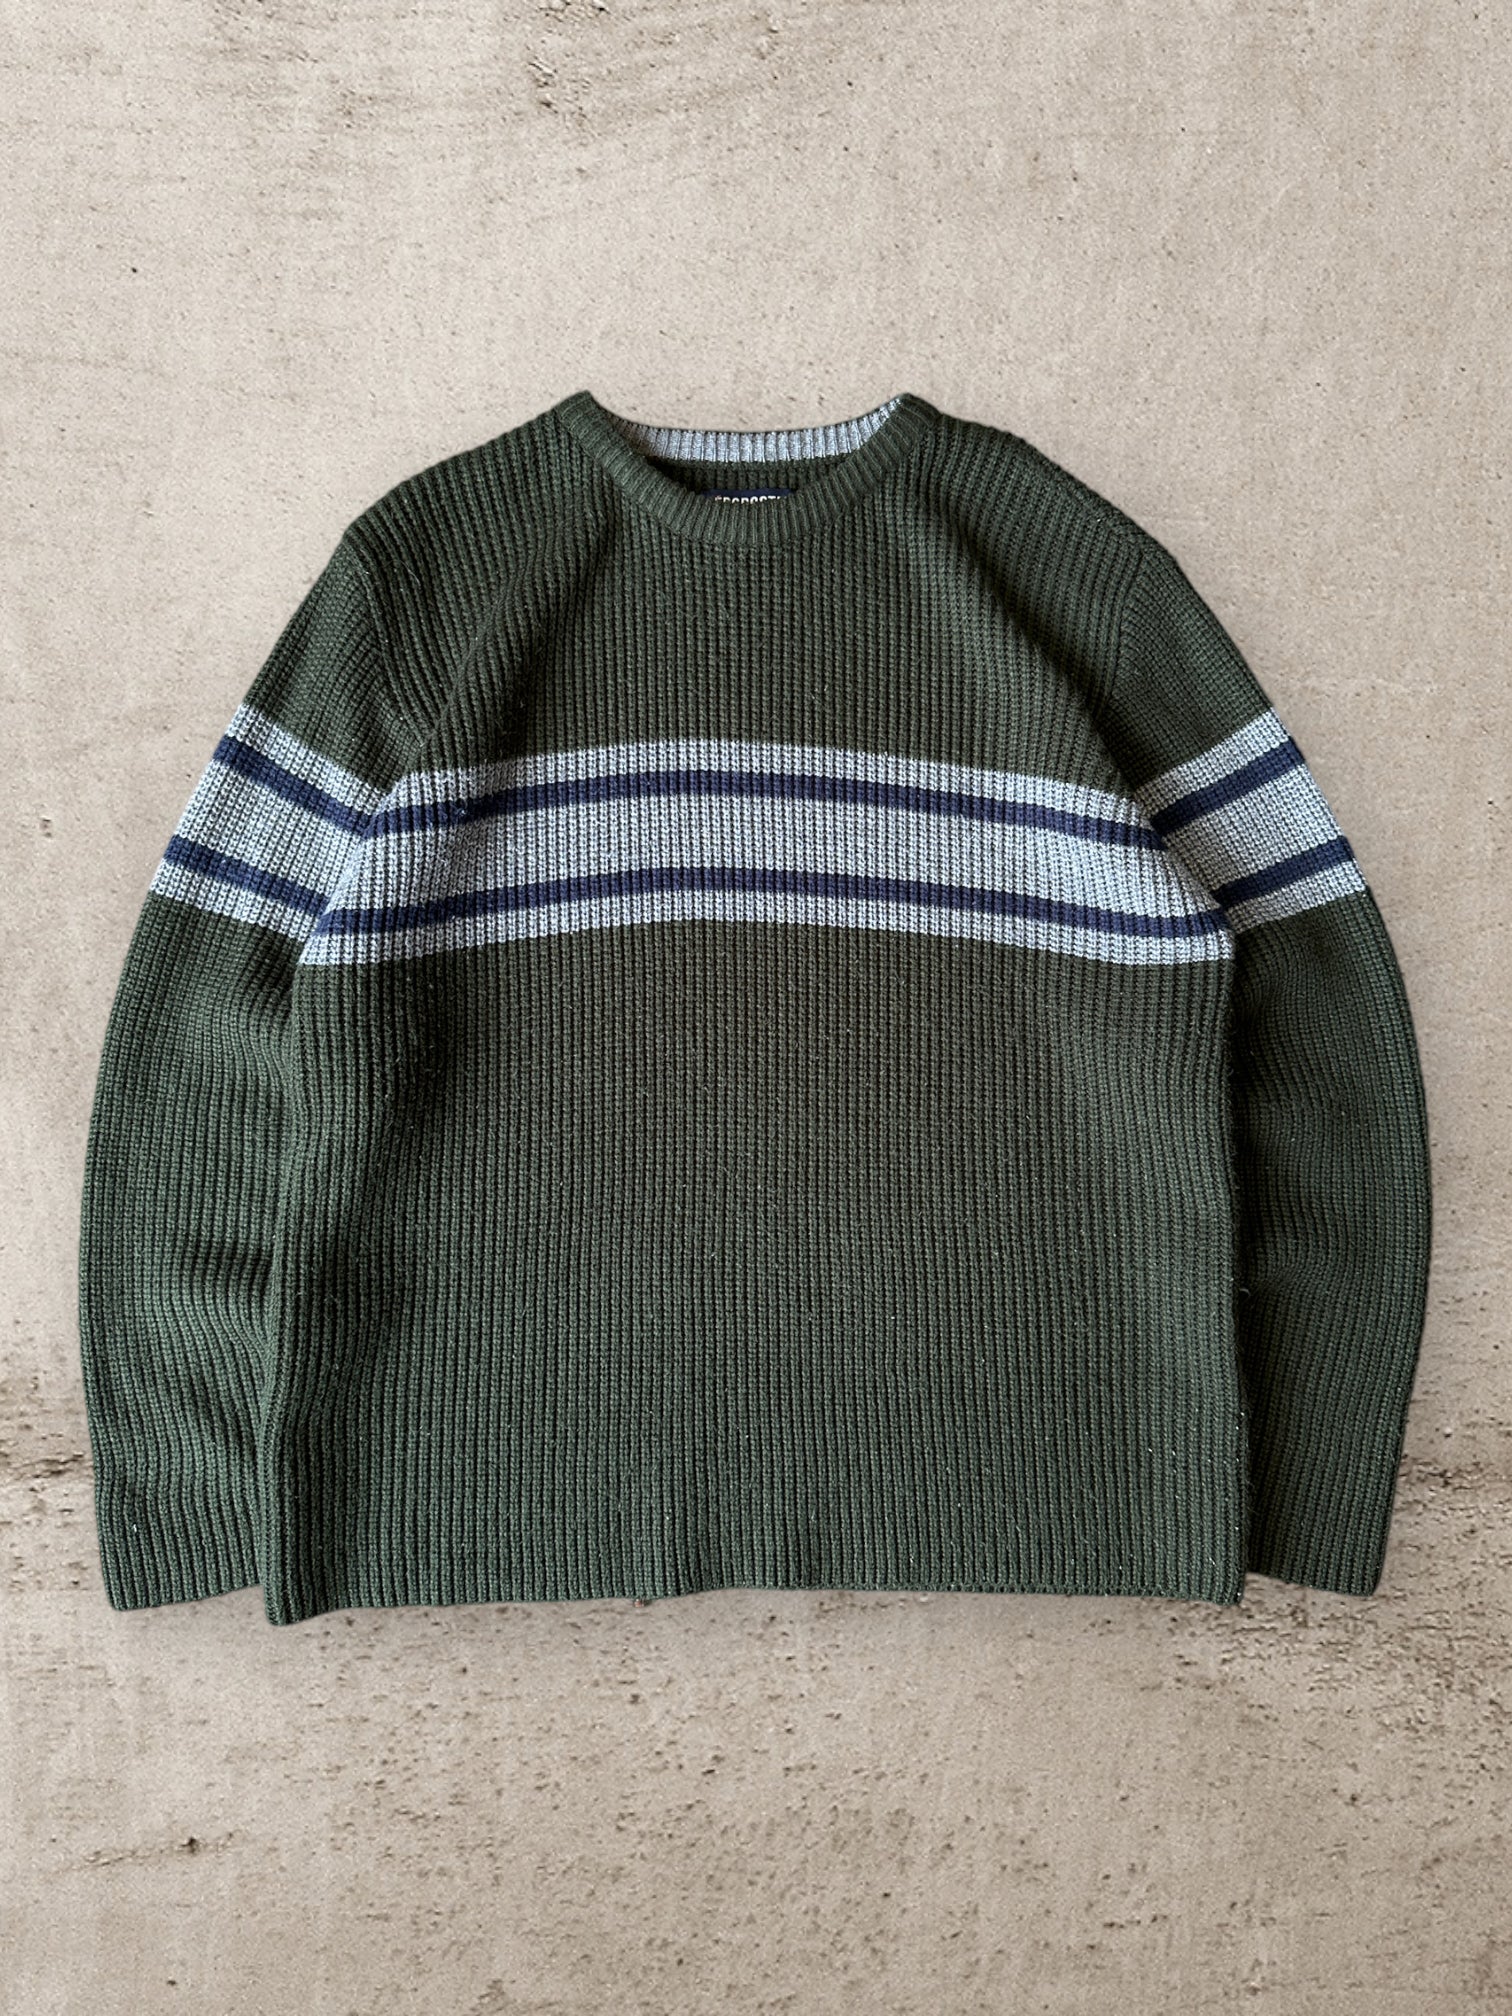 00s Olive Striped Knit Sweater - Large